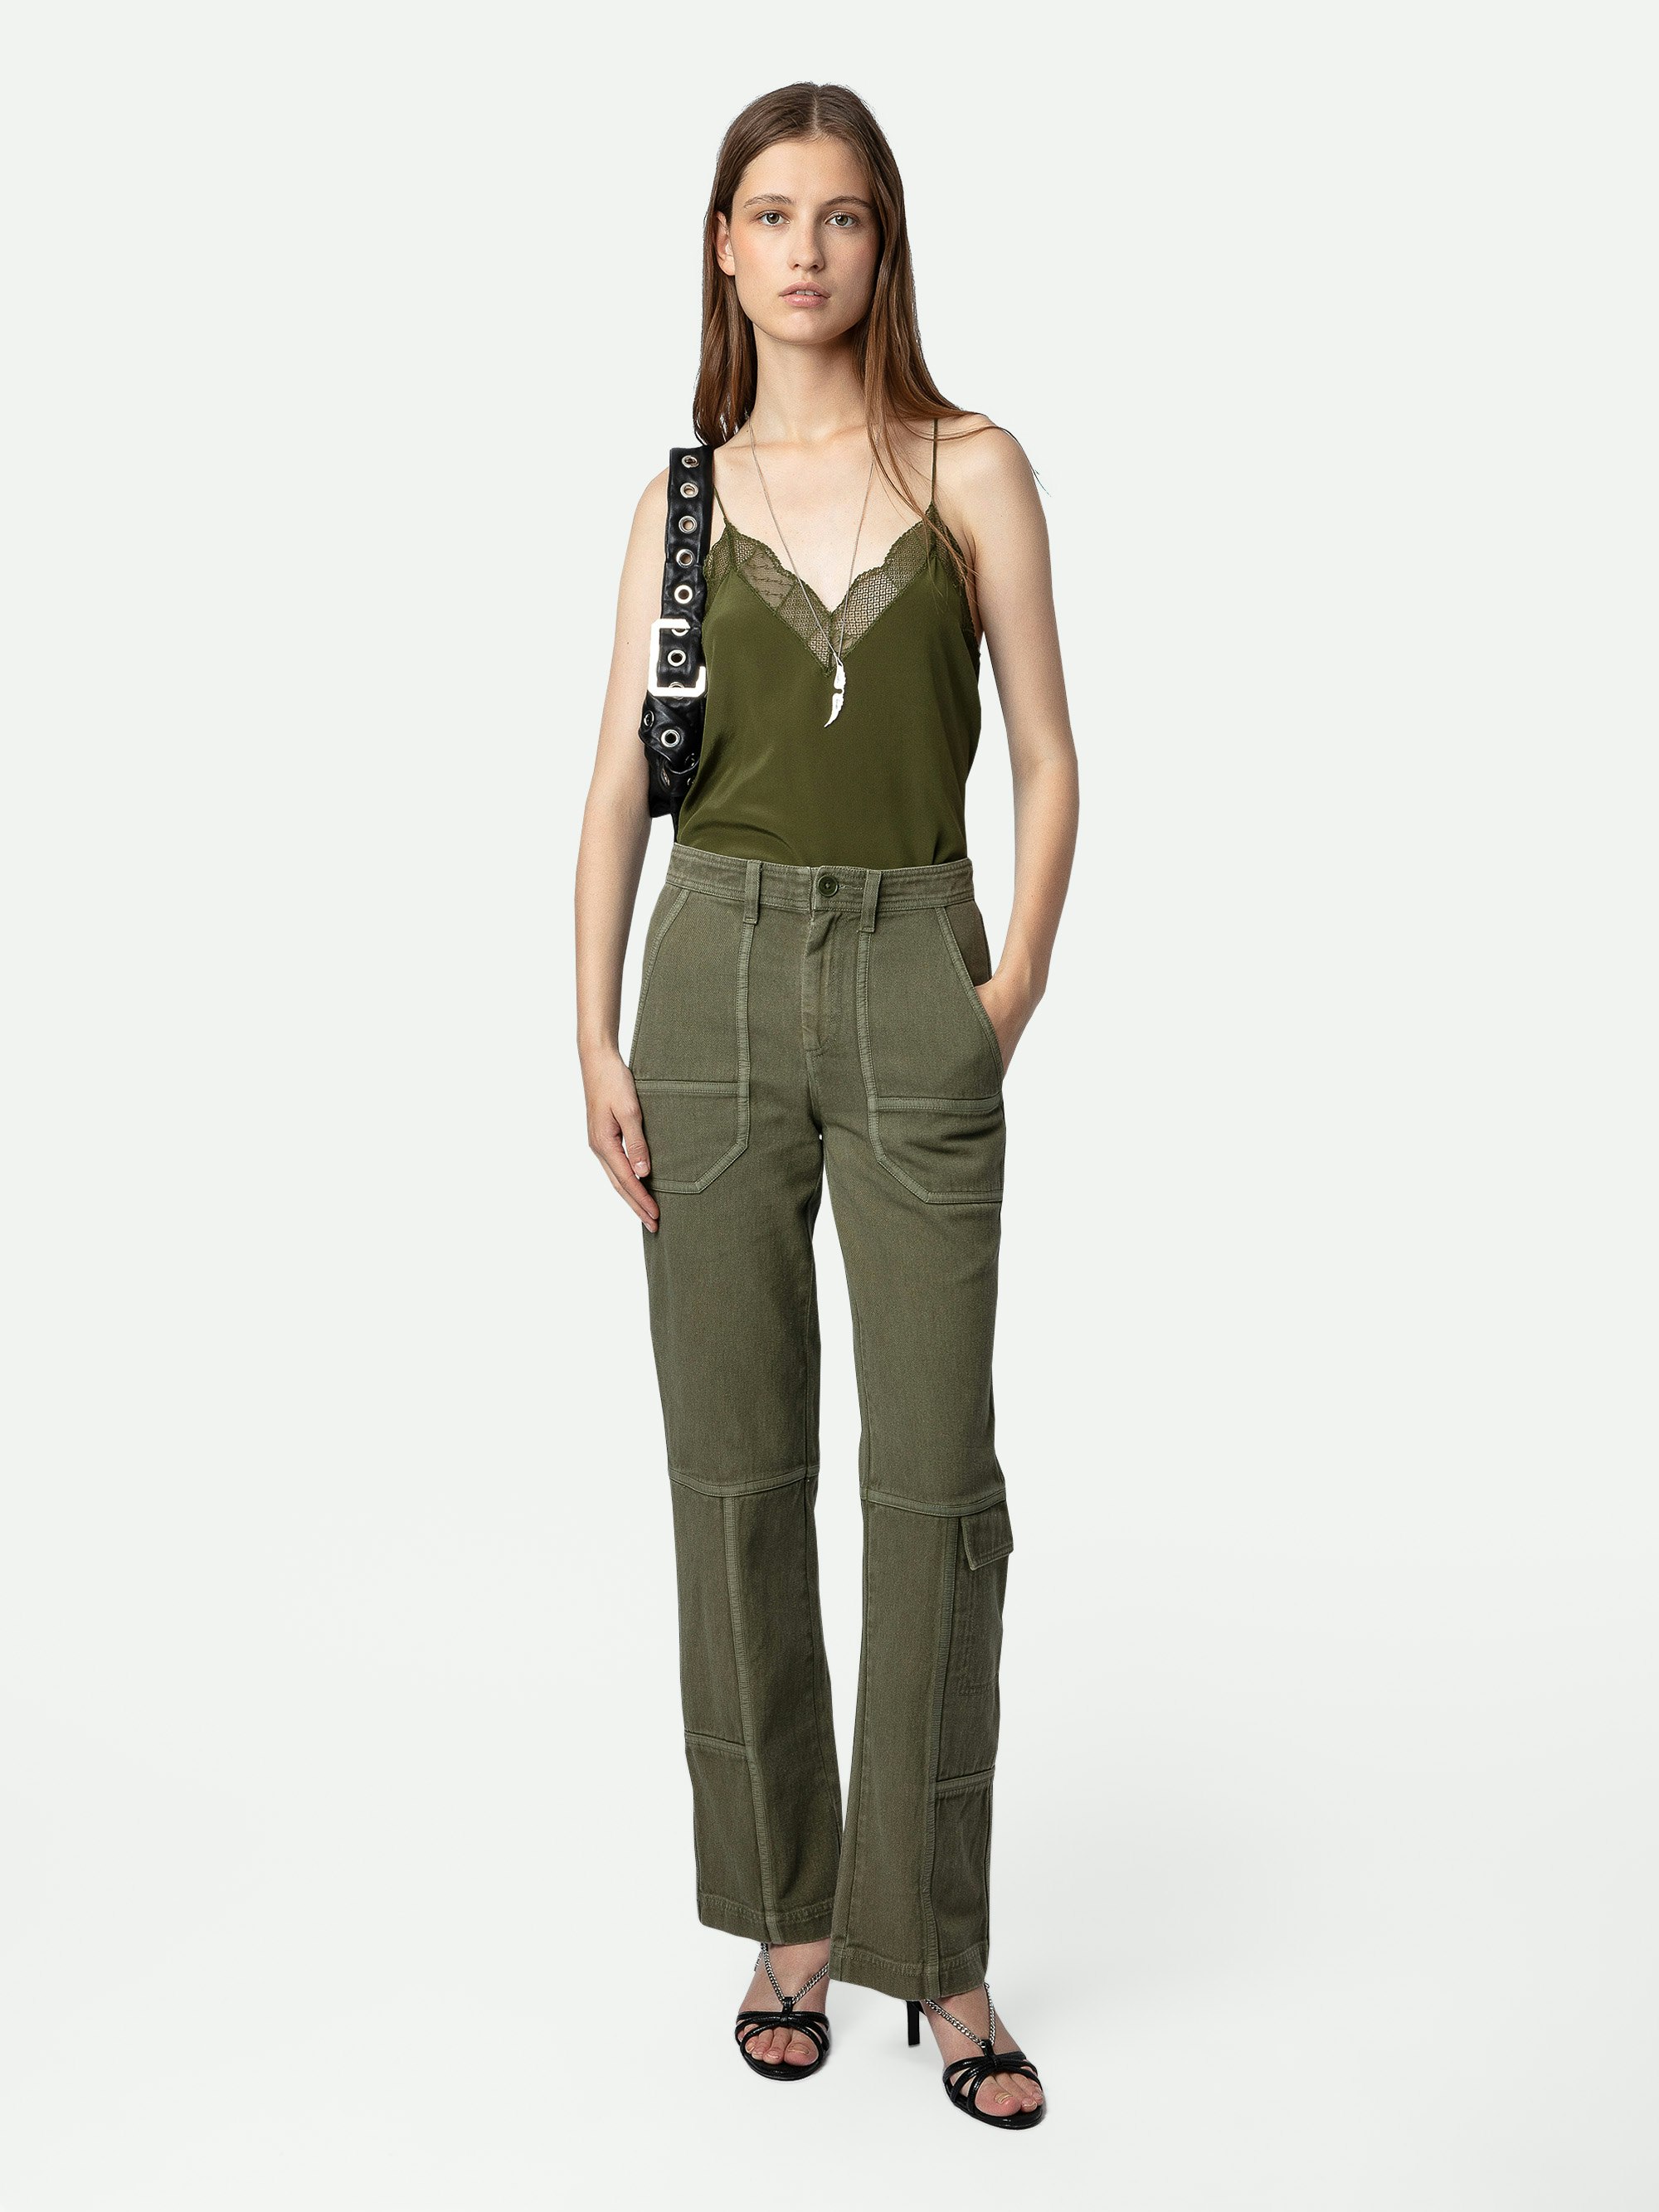 Pepper Trousers - Women’s khaki twill cotton trousers with contrasting details.